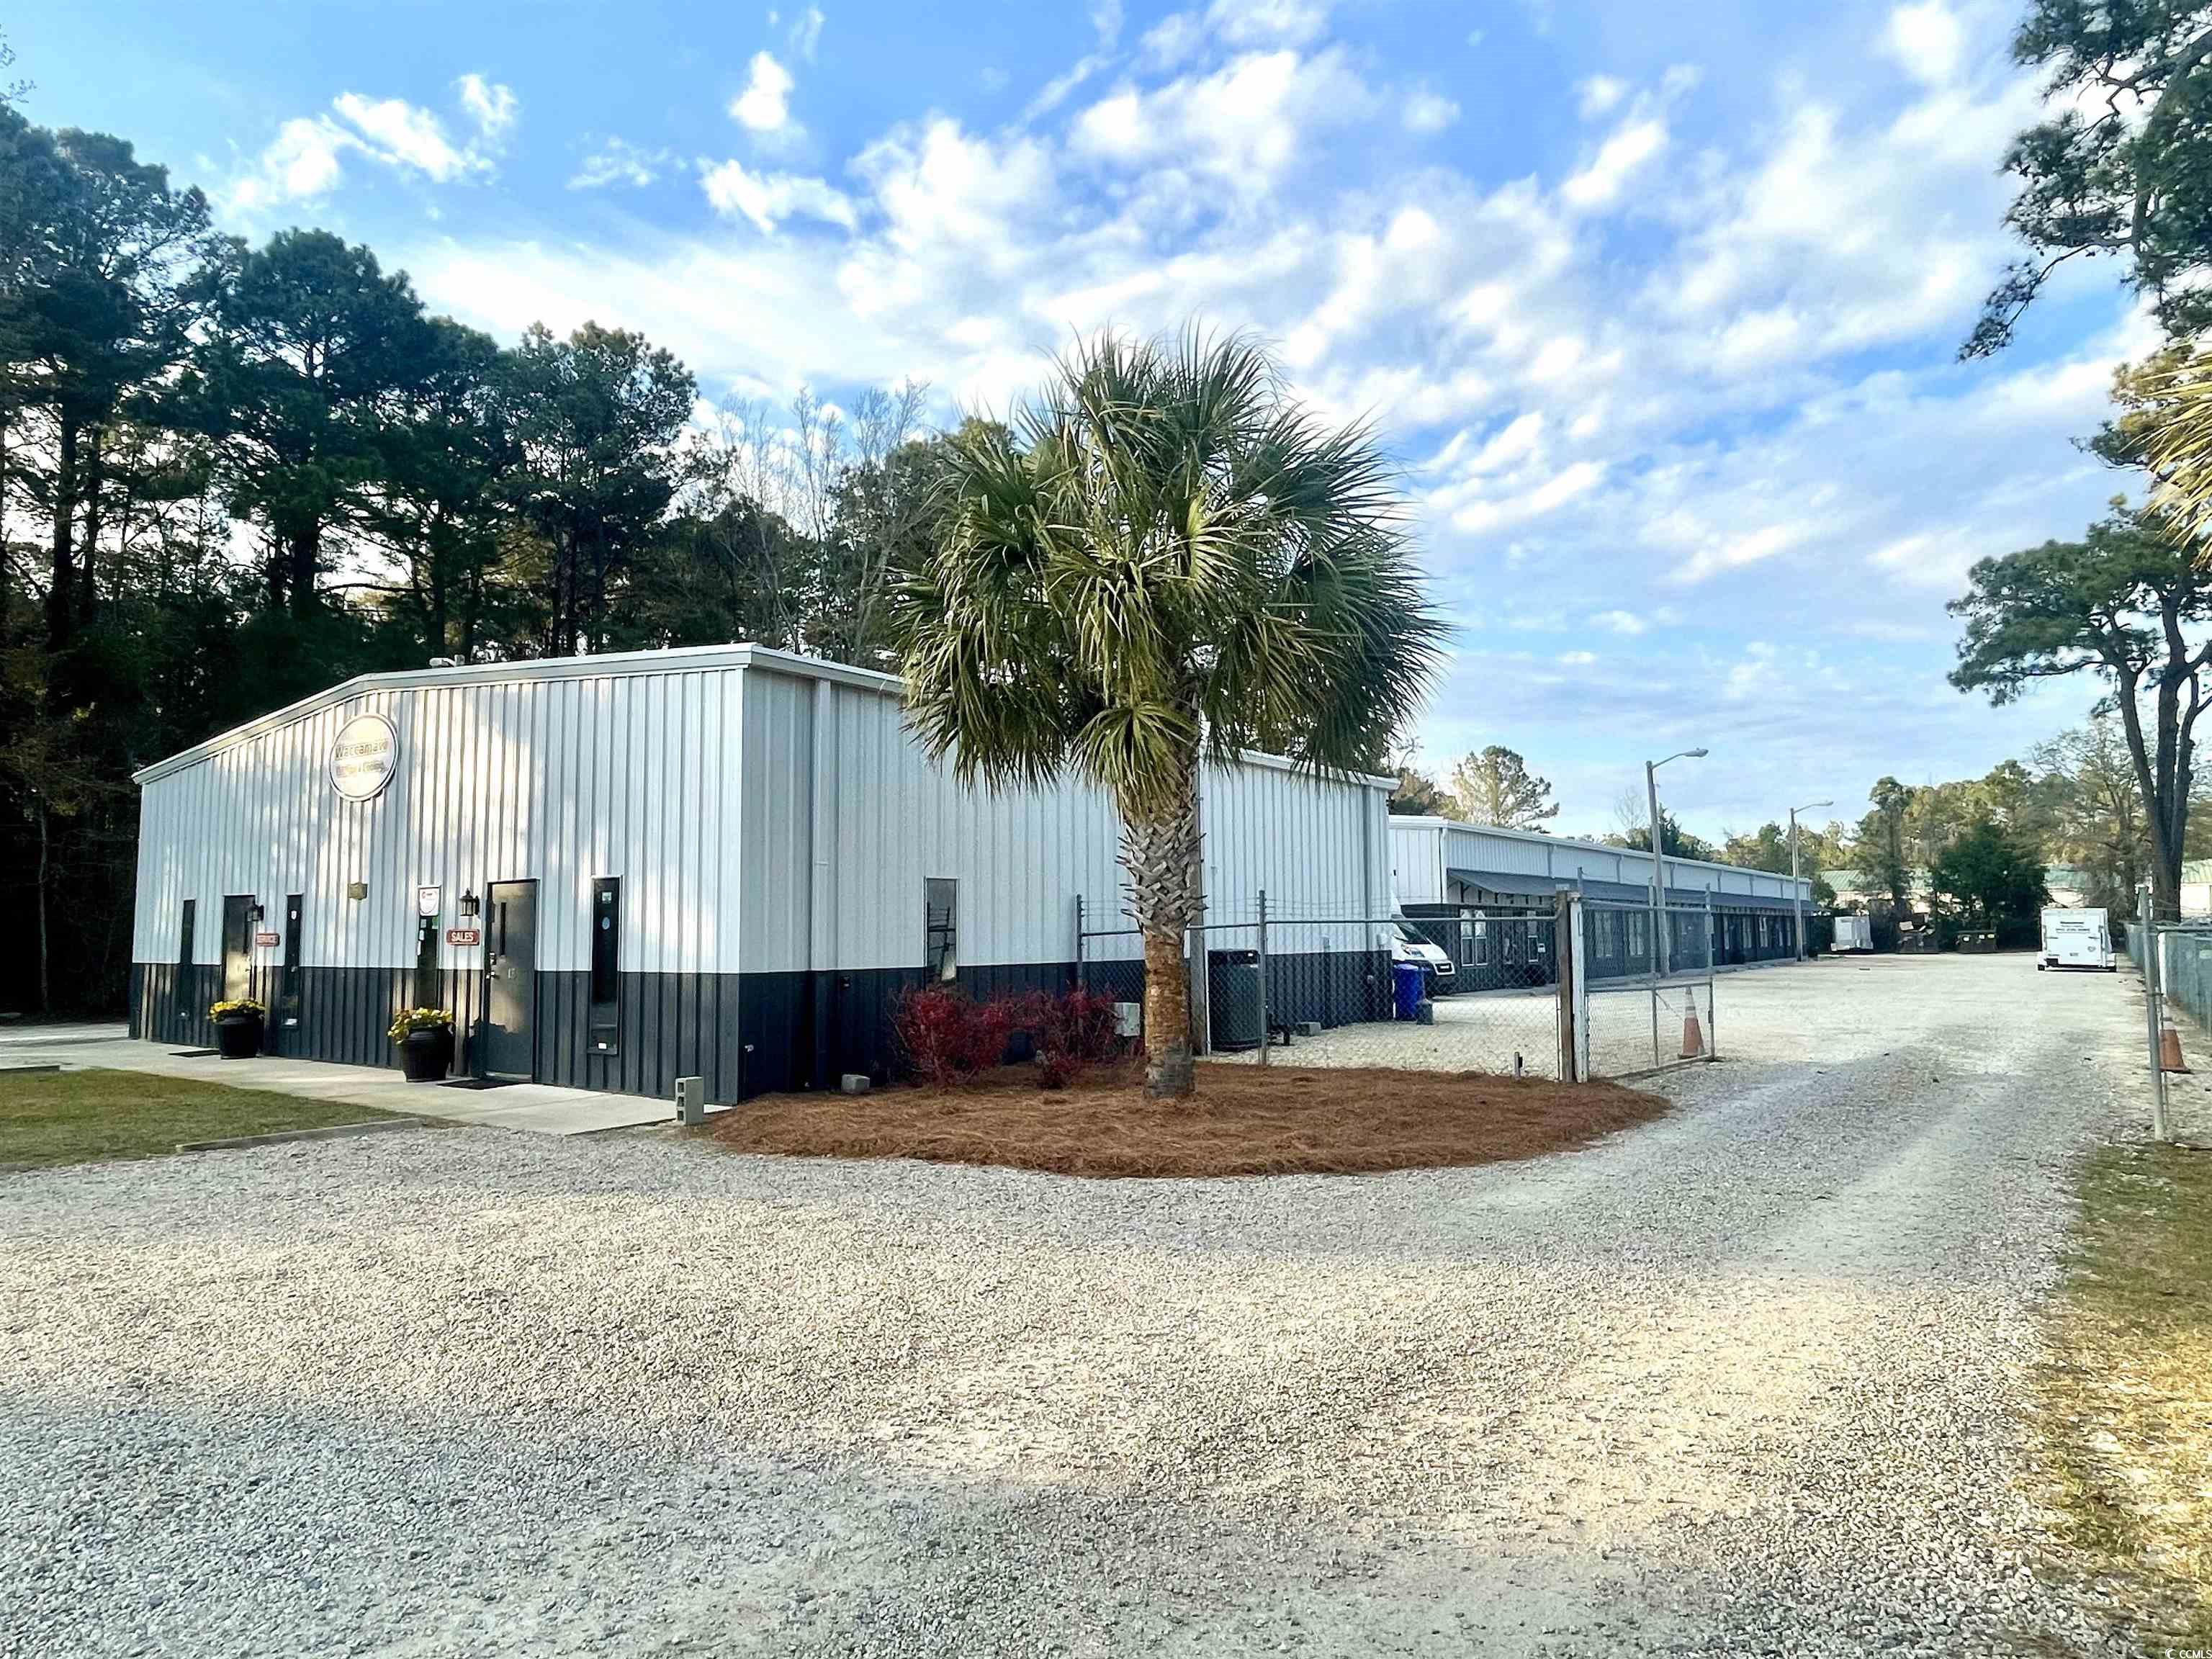 space available july 1, 2024. can be combined with adjacent warehouse up to 2,434 sf. warehouse space in the heart of pawleys island. the property has easy access to highway 17 and is in close proximity to the major retail and residential areas of pawleys. this site is ideal for businesses that service areas from georgetown to myrtle beach. property improvements underway include new exterior paint and landscaping, installation of a new monument sign, branding and way-finding signage, new storefront entryways and roll form awnings, repairing/replacing roofs and roll up doors, and filling holes in gravel driveway. zoning: resort service, county of georgetown, sc.  industrial space up to 14,810 sf coming available soon.